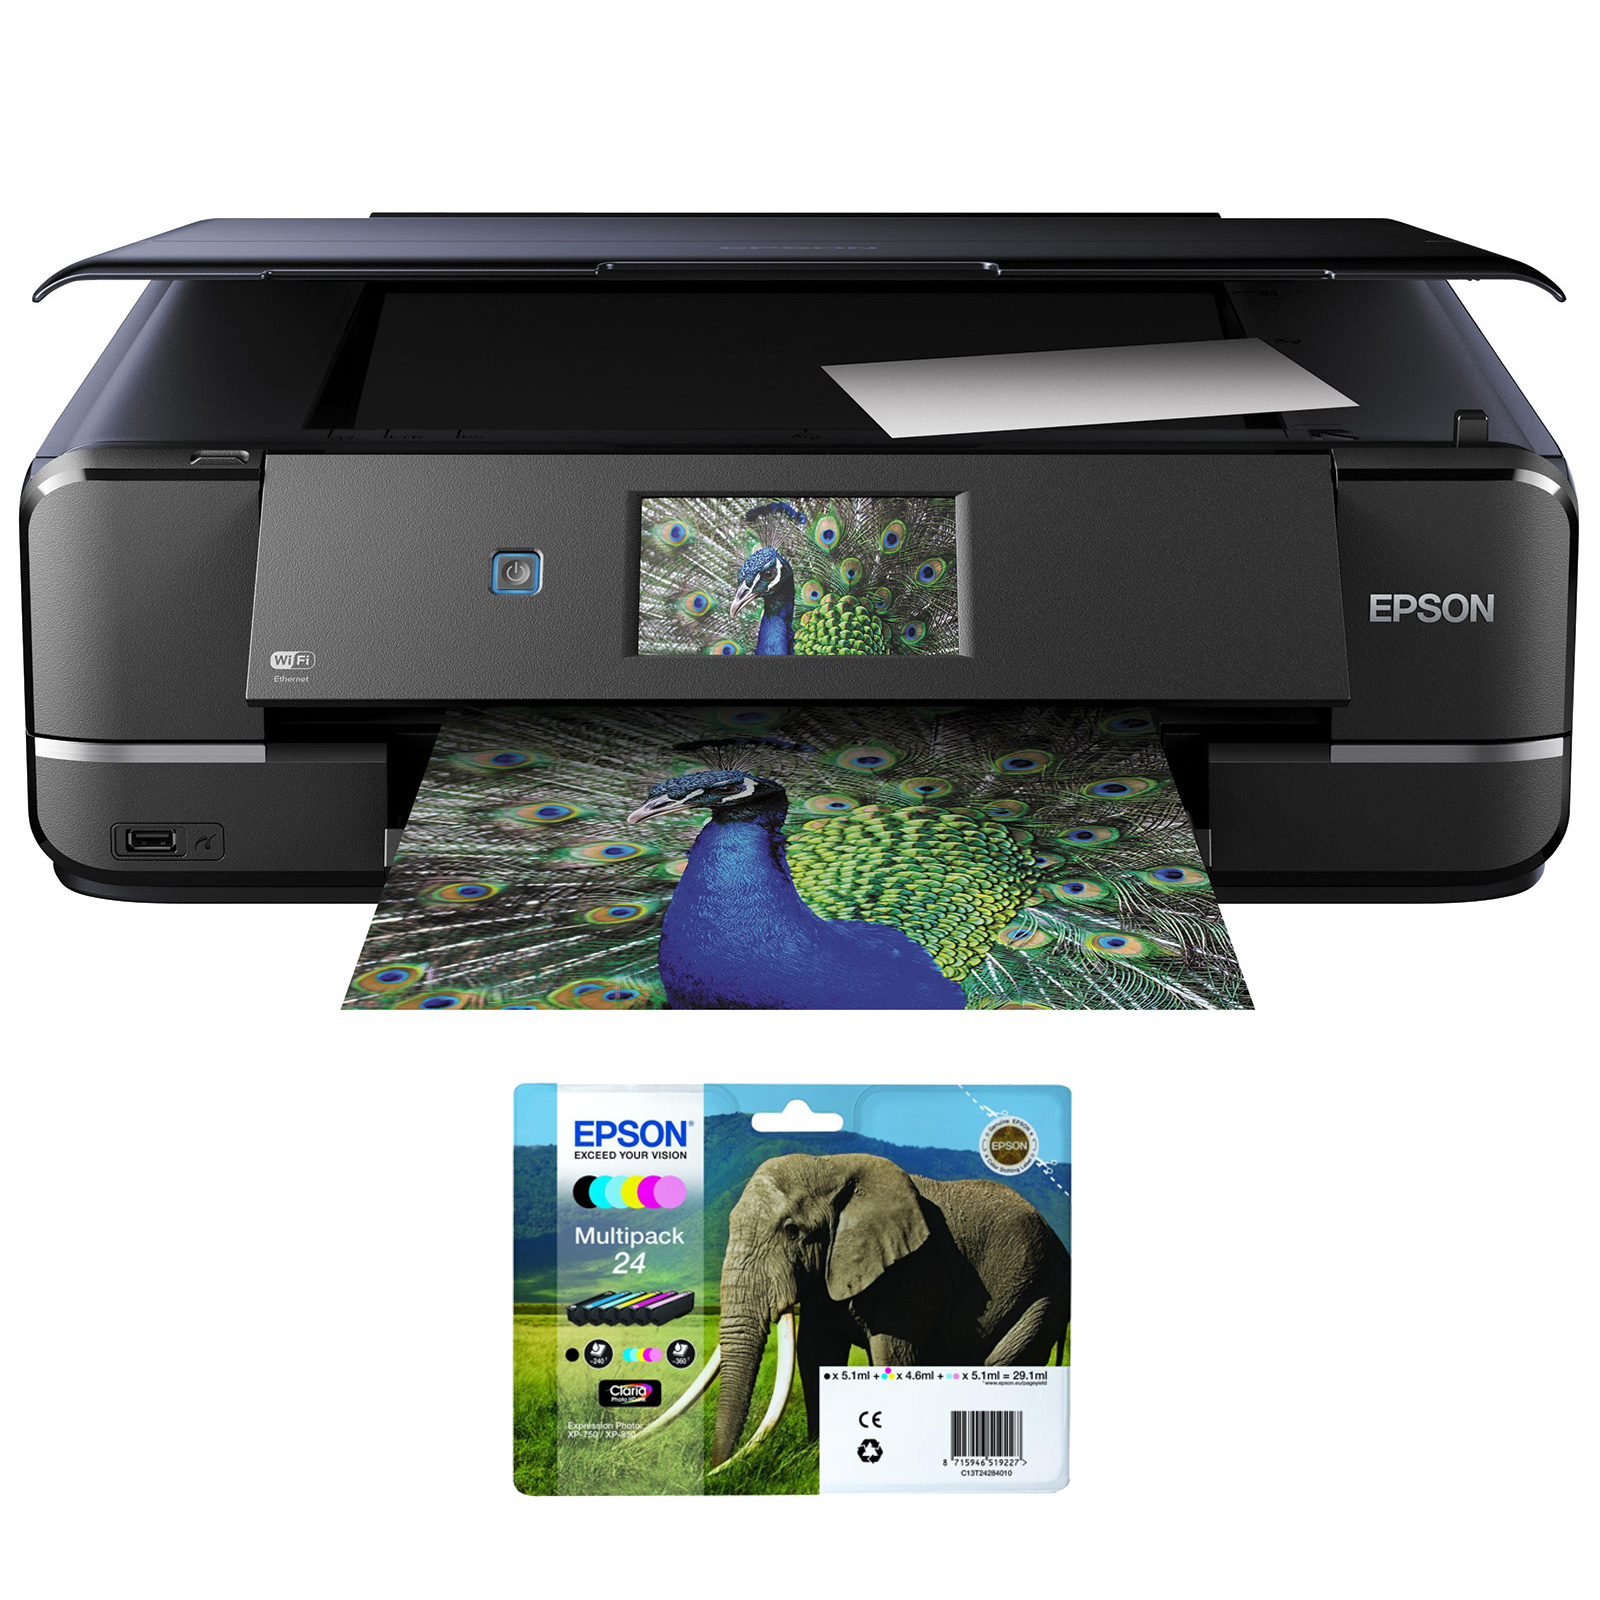  Epson  Expression Photo  XP 960 Epson  T2428 MultiPack 